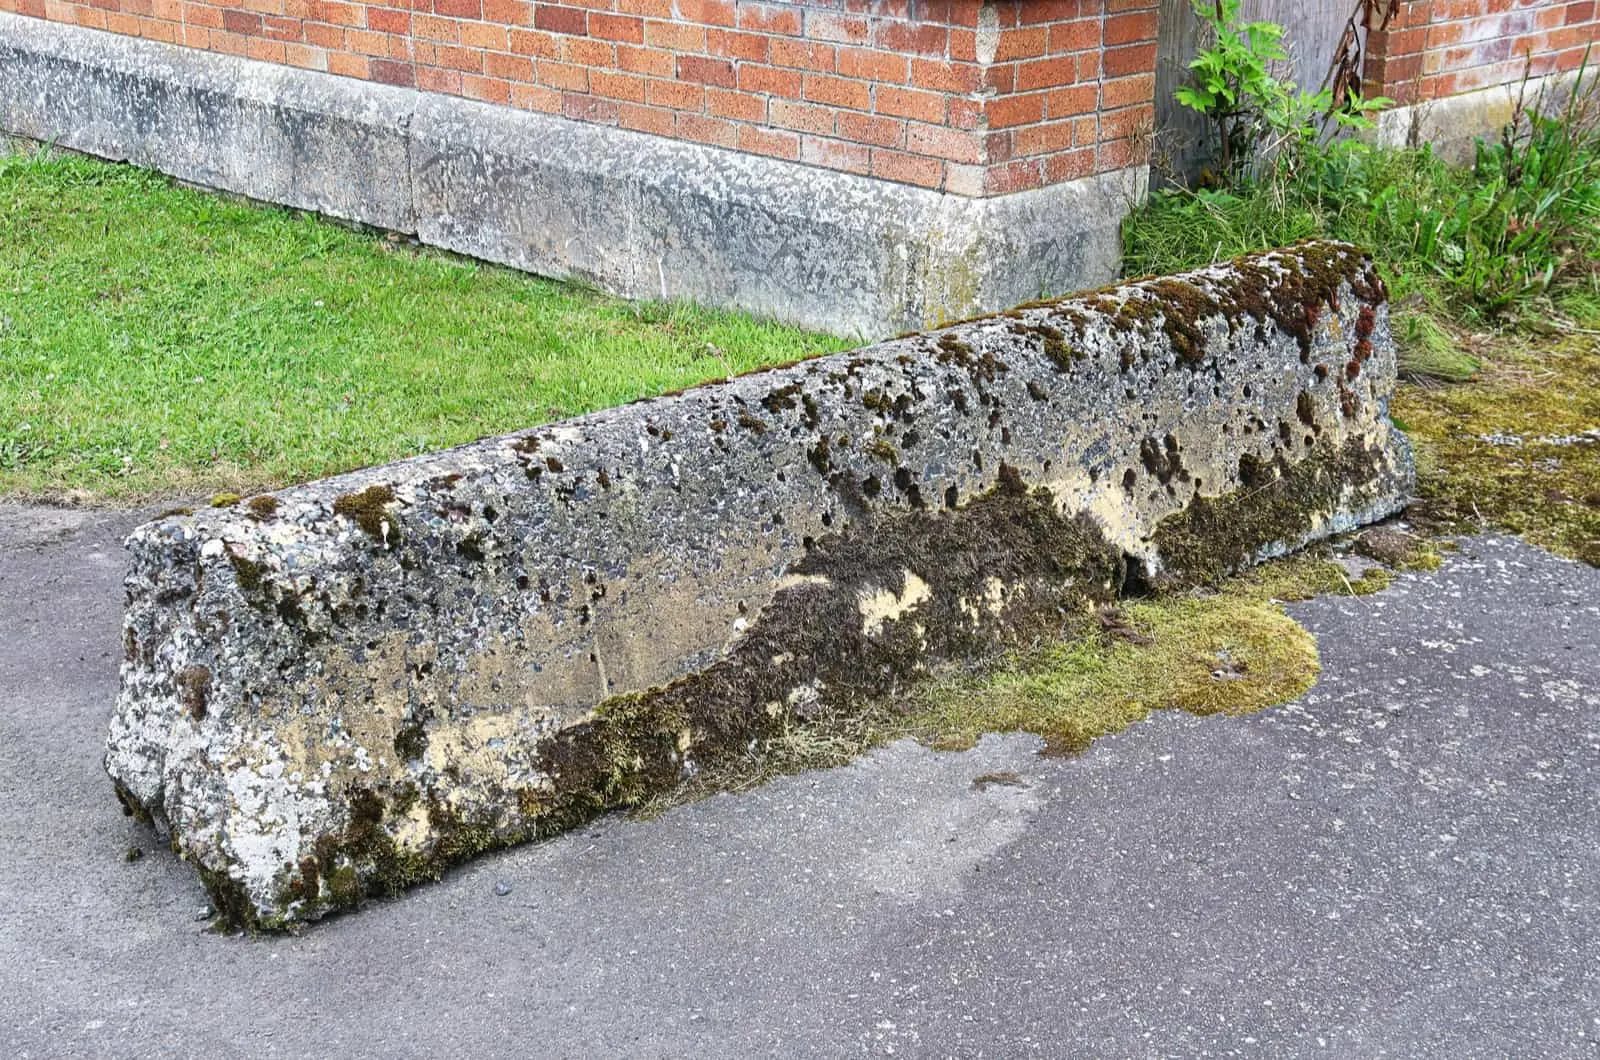 A concrete divider covered in green moss